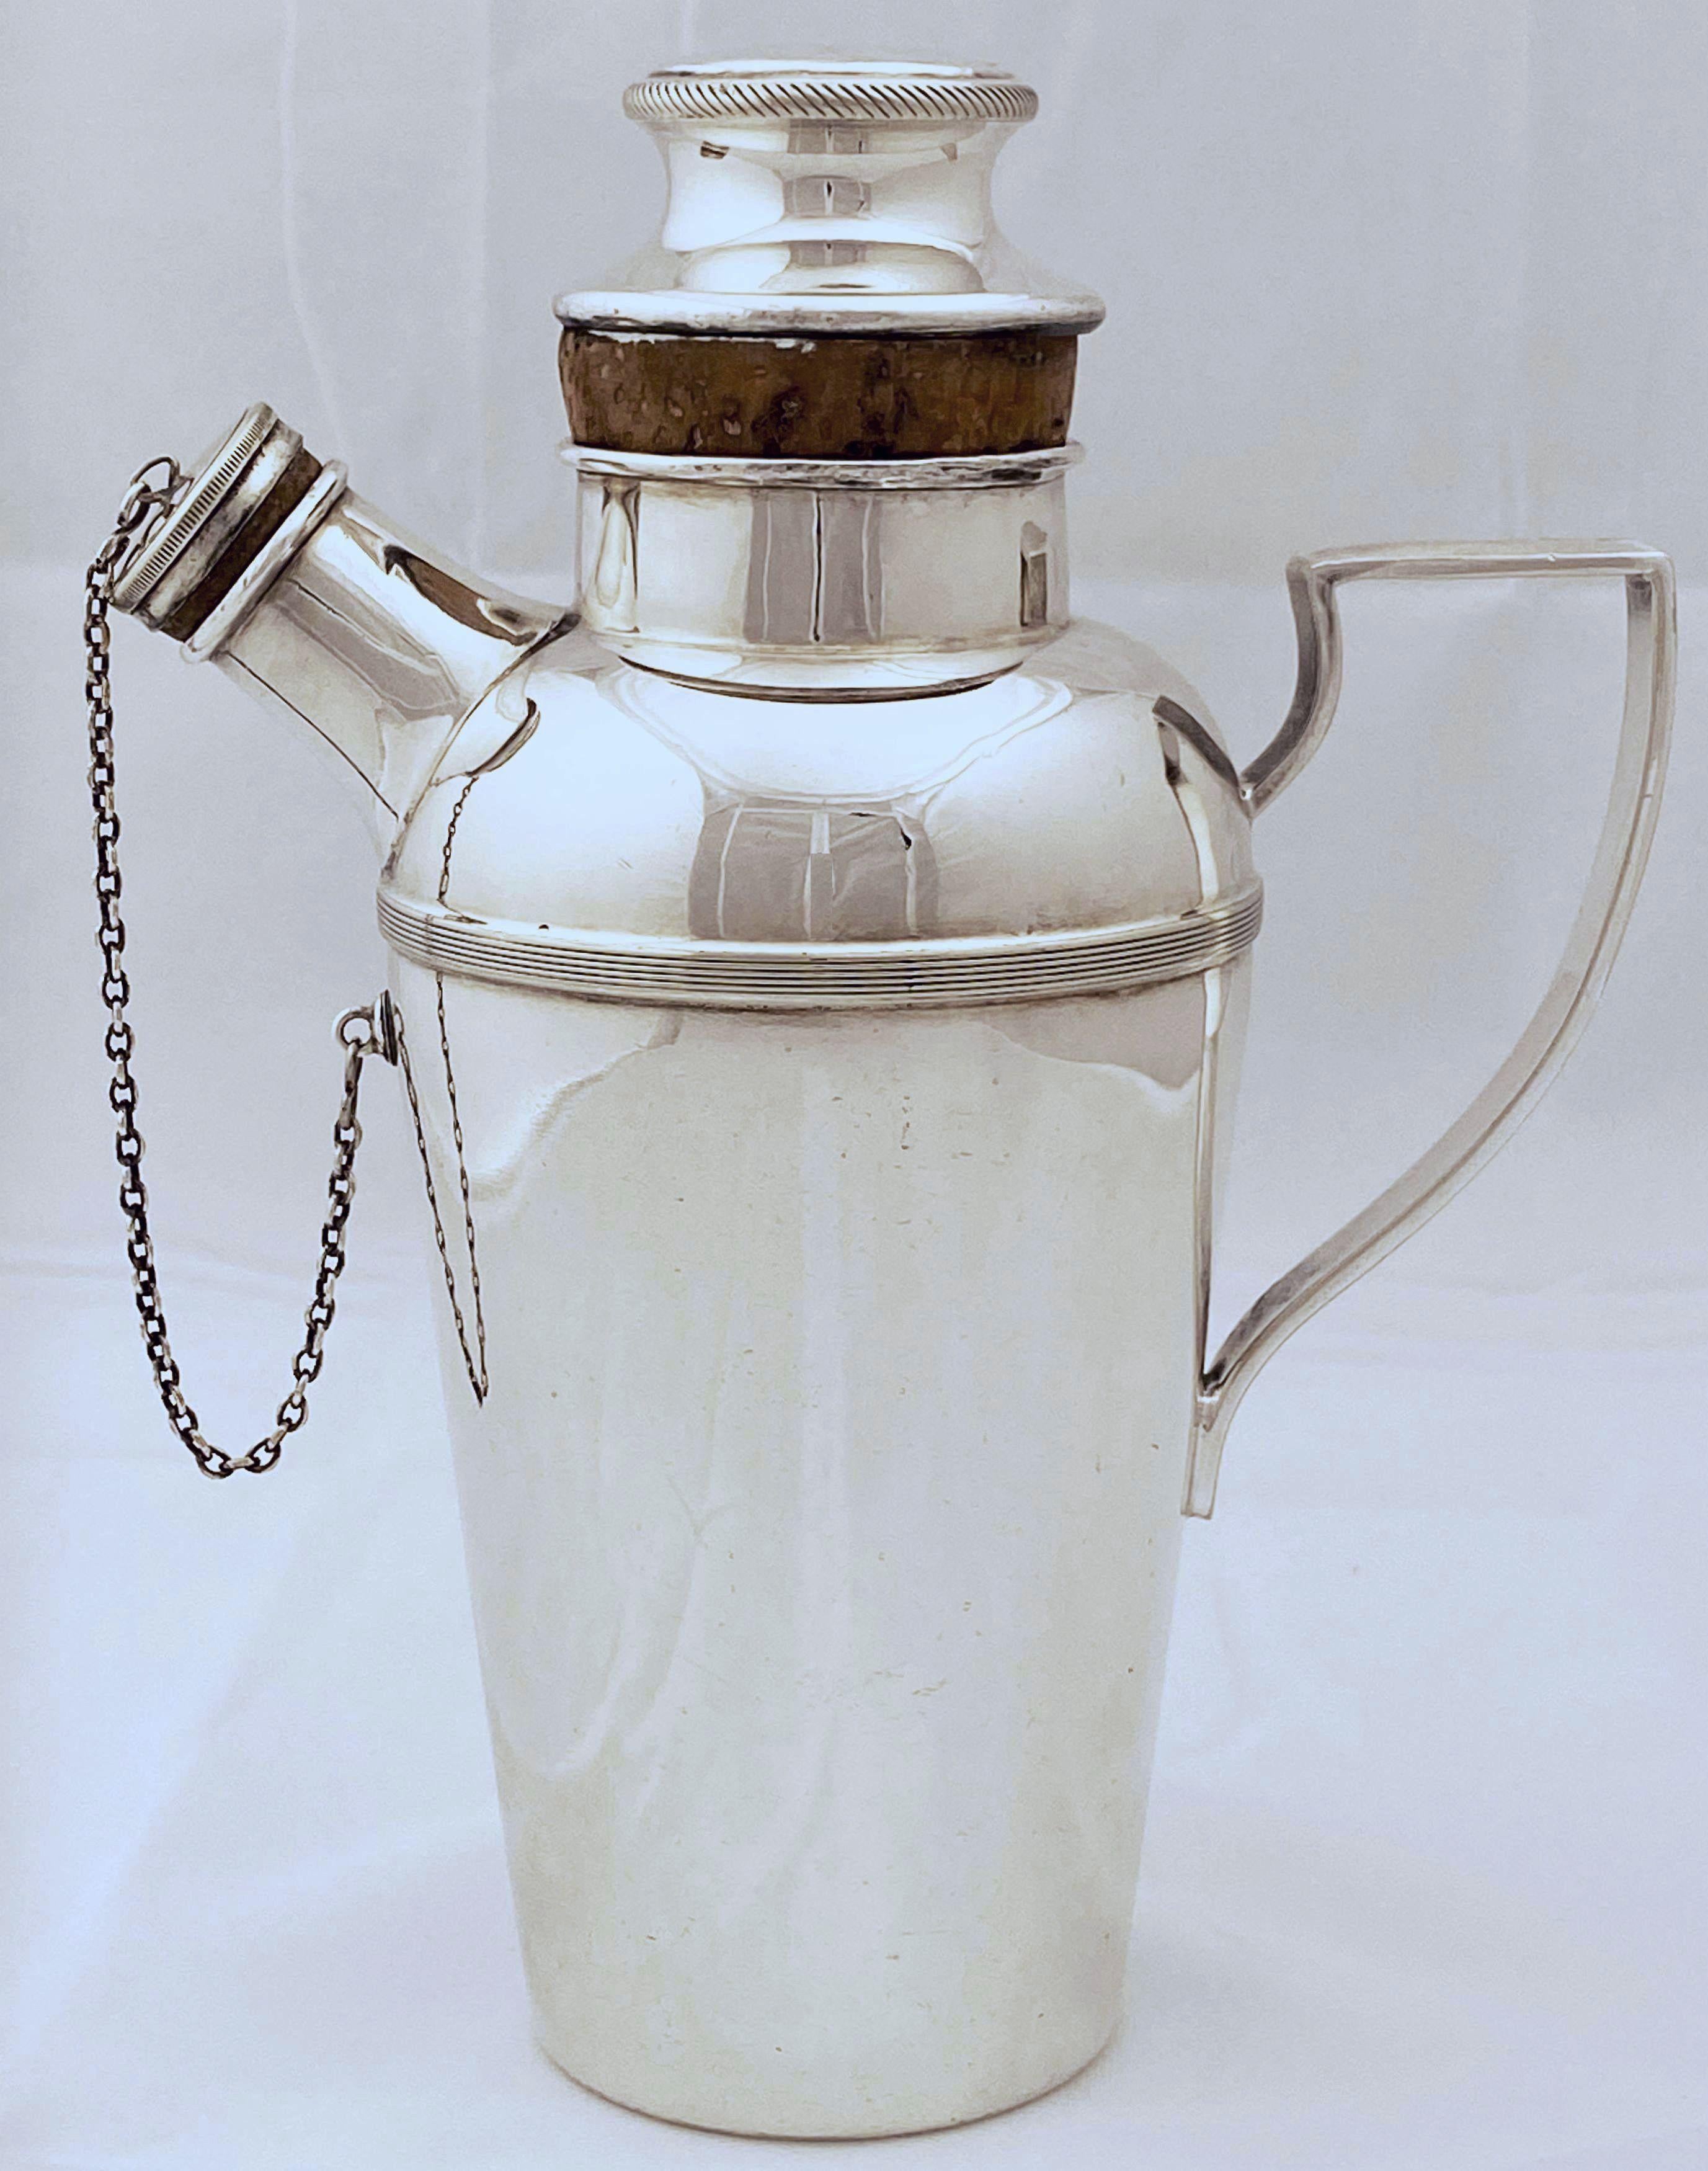 A vintage English cylindrical martini or cocktail shaker of fine plate silver from the Art Deco period, by James Dixon and Sons, with engine-turned removable cap and pour spout with strainer and corked cap with chain (captive capped spout). The cap